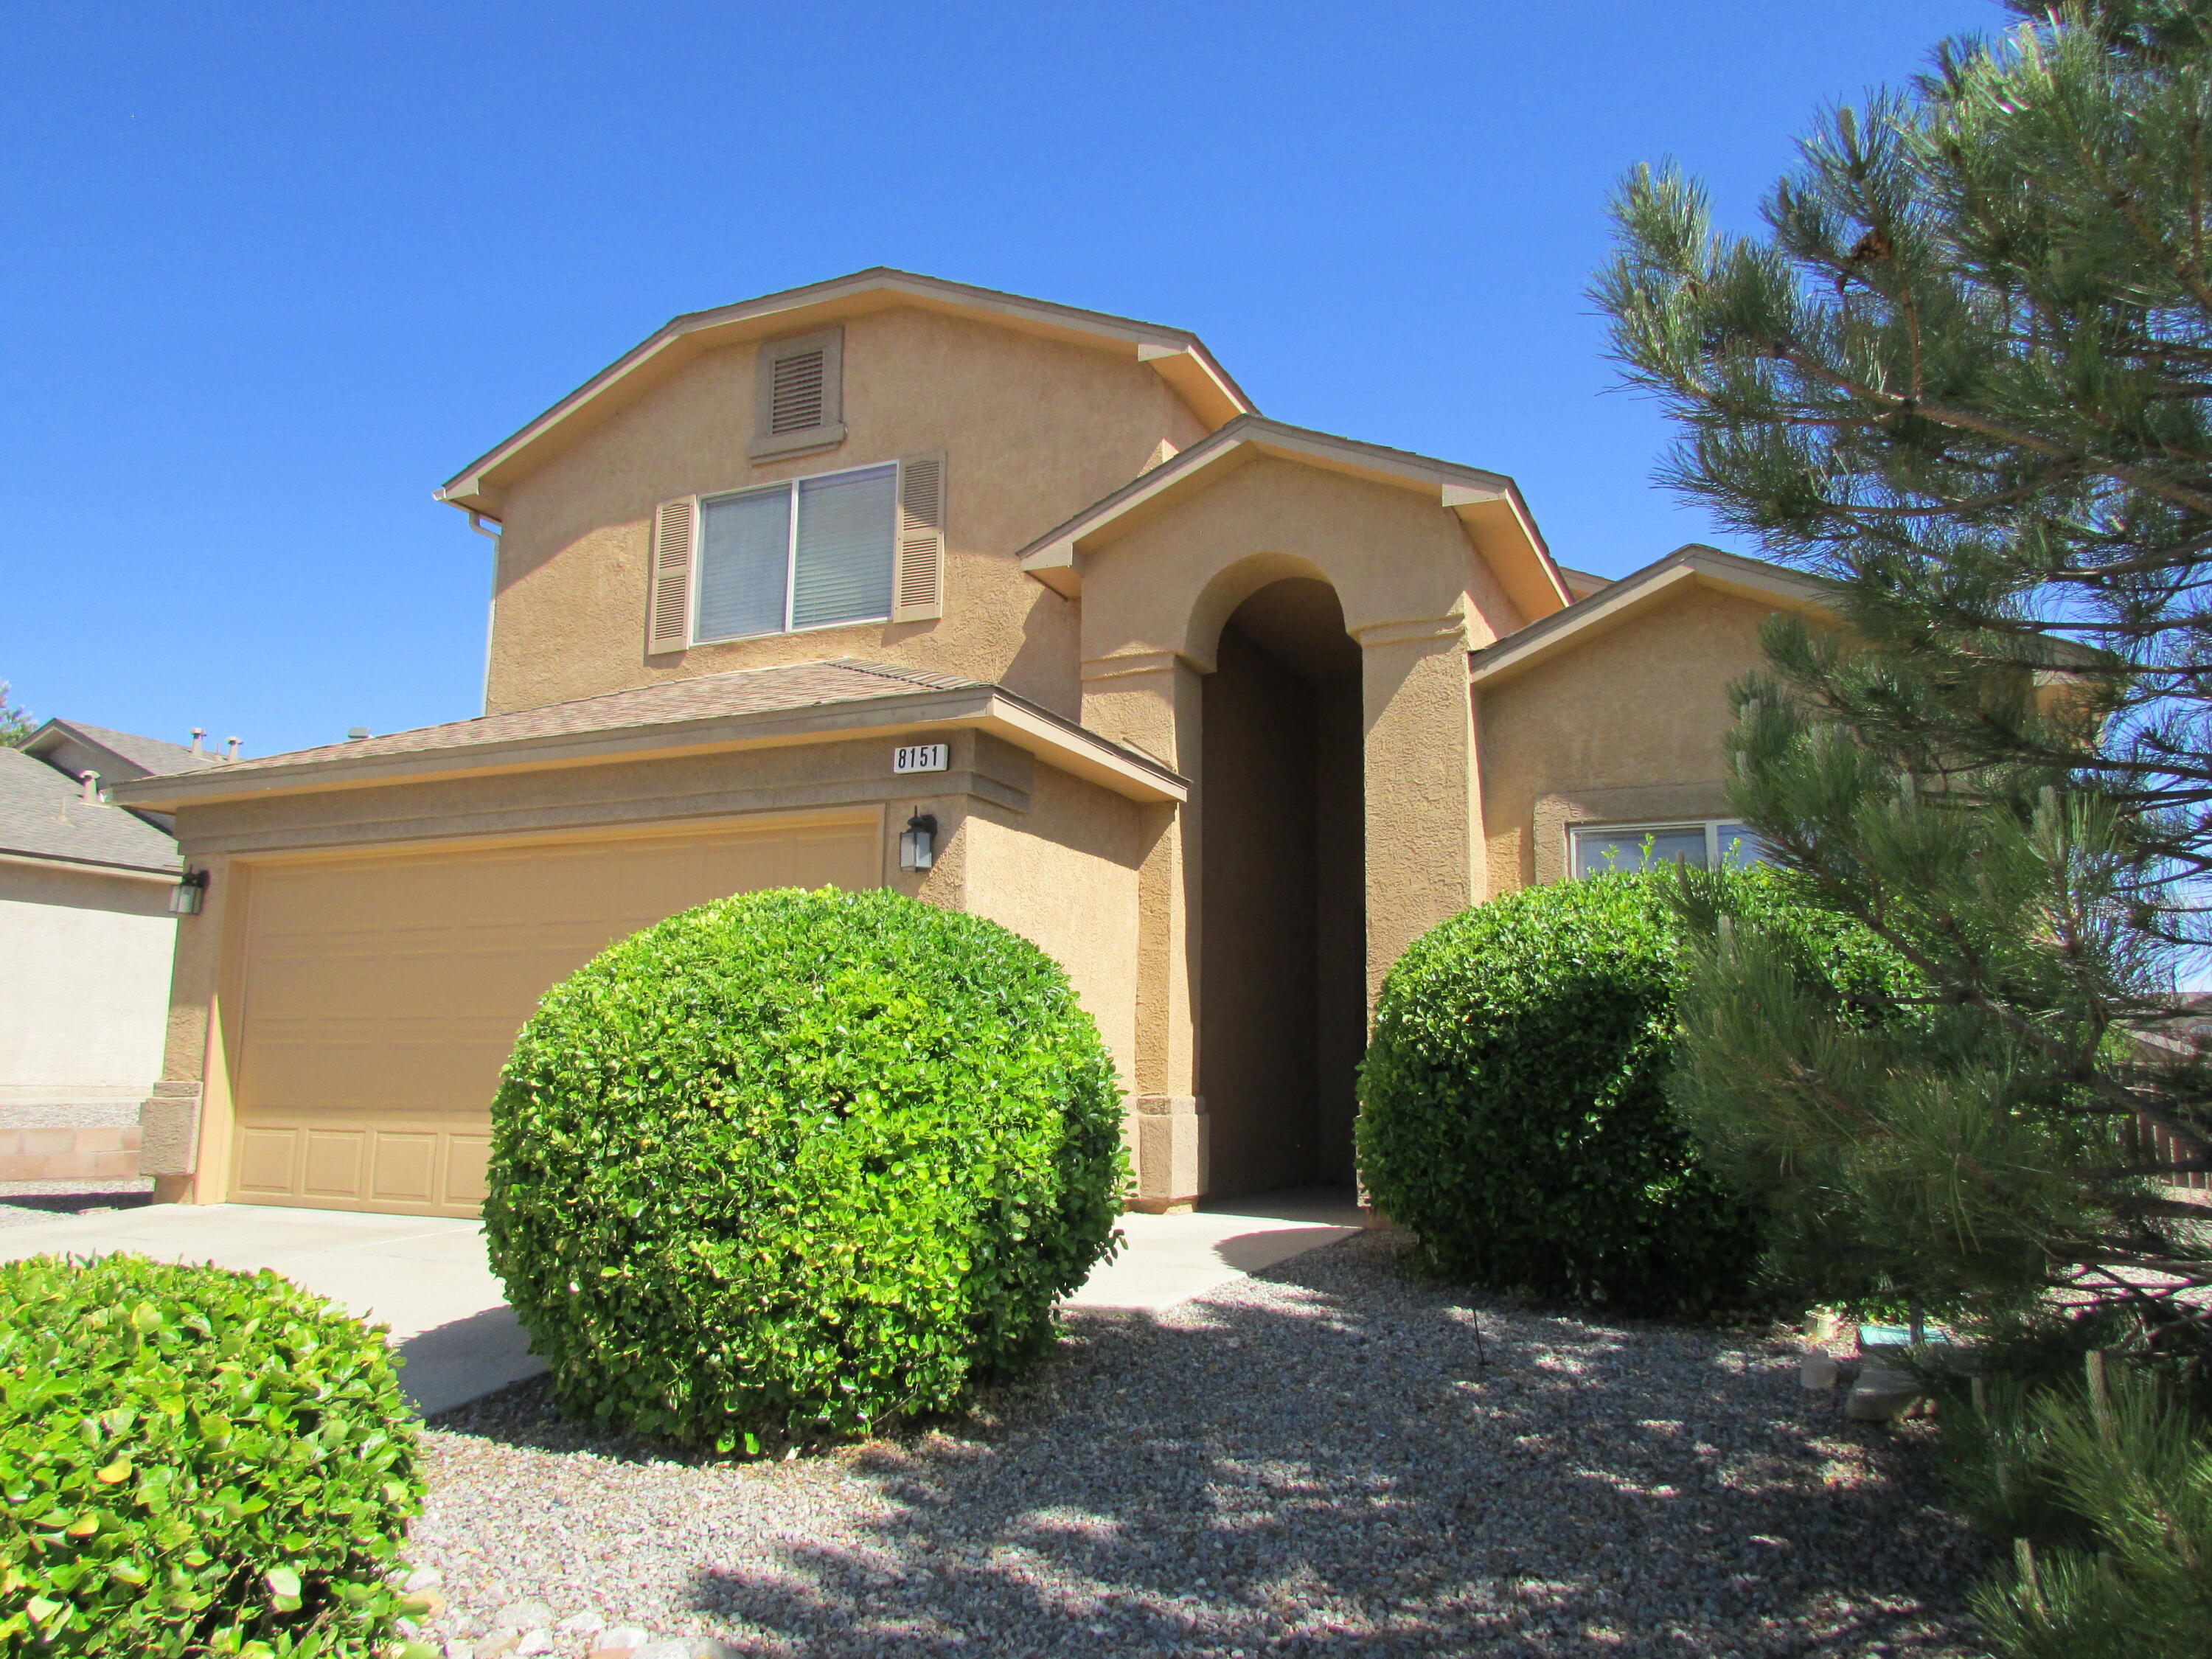 8151 Long Mesa Place NW, Albuquerque, New Mexico 87114, 3 Bedrooms Bedrooms, ,3 BathroomsBathrooms,Residential,For Sale,8151 Long Mesa Place NW,1062356